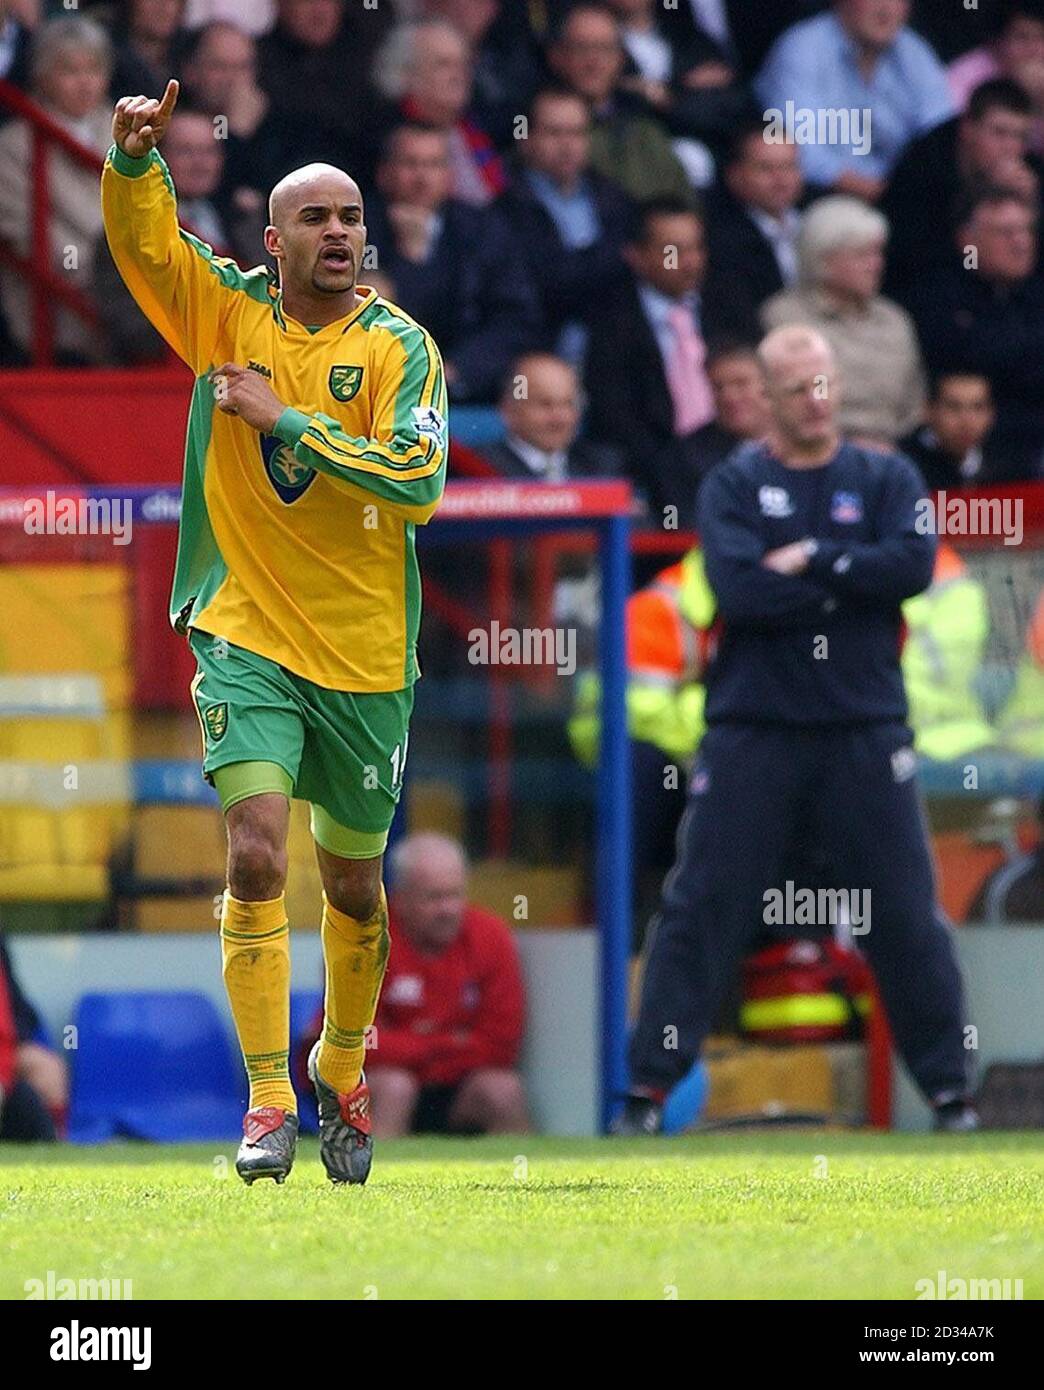 Norwich City's Leon McKenzie celebrates scoring while Crystal Palace manager Ian Dowie stands on the touchline dejected Stock Photo